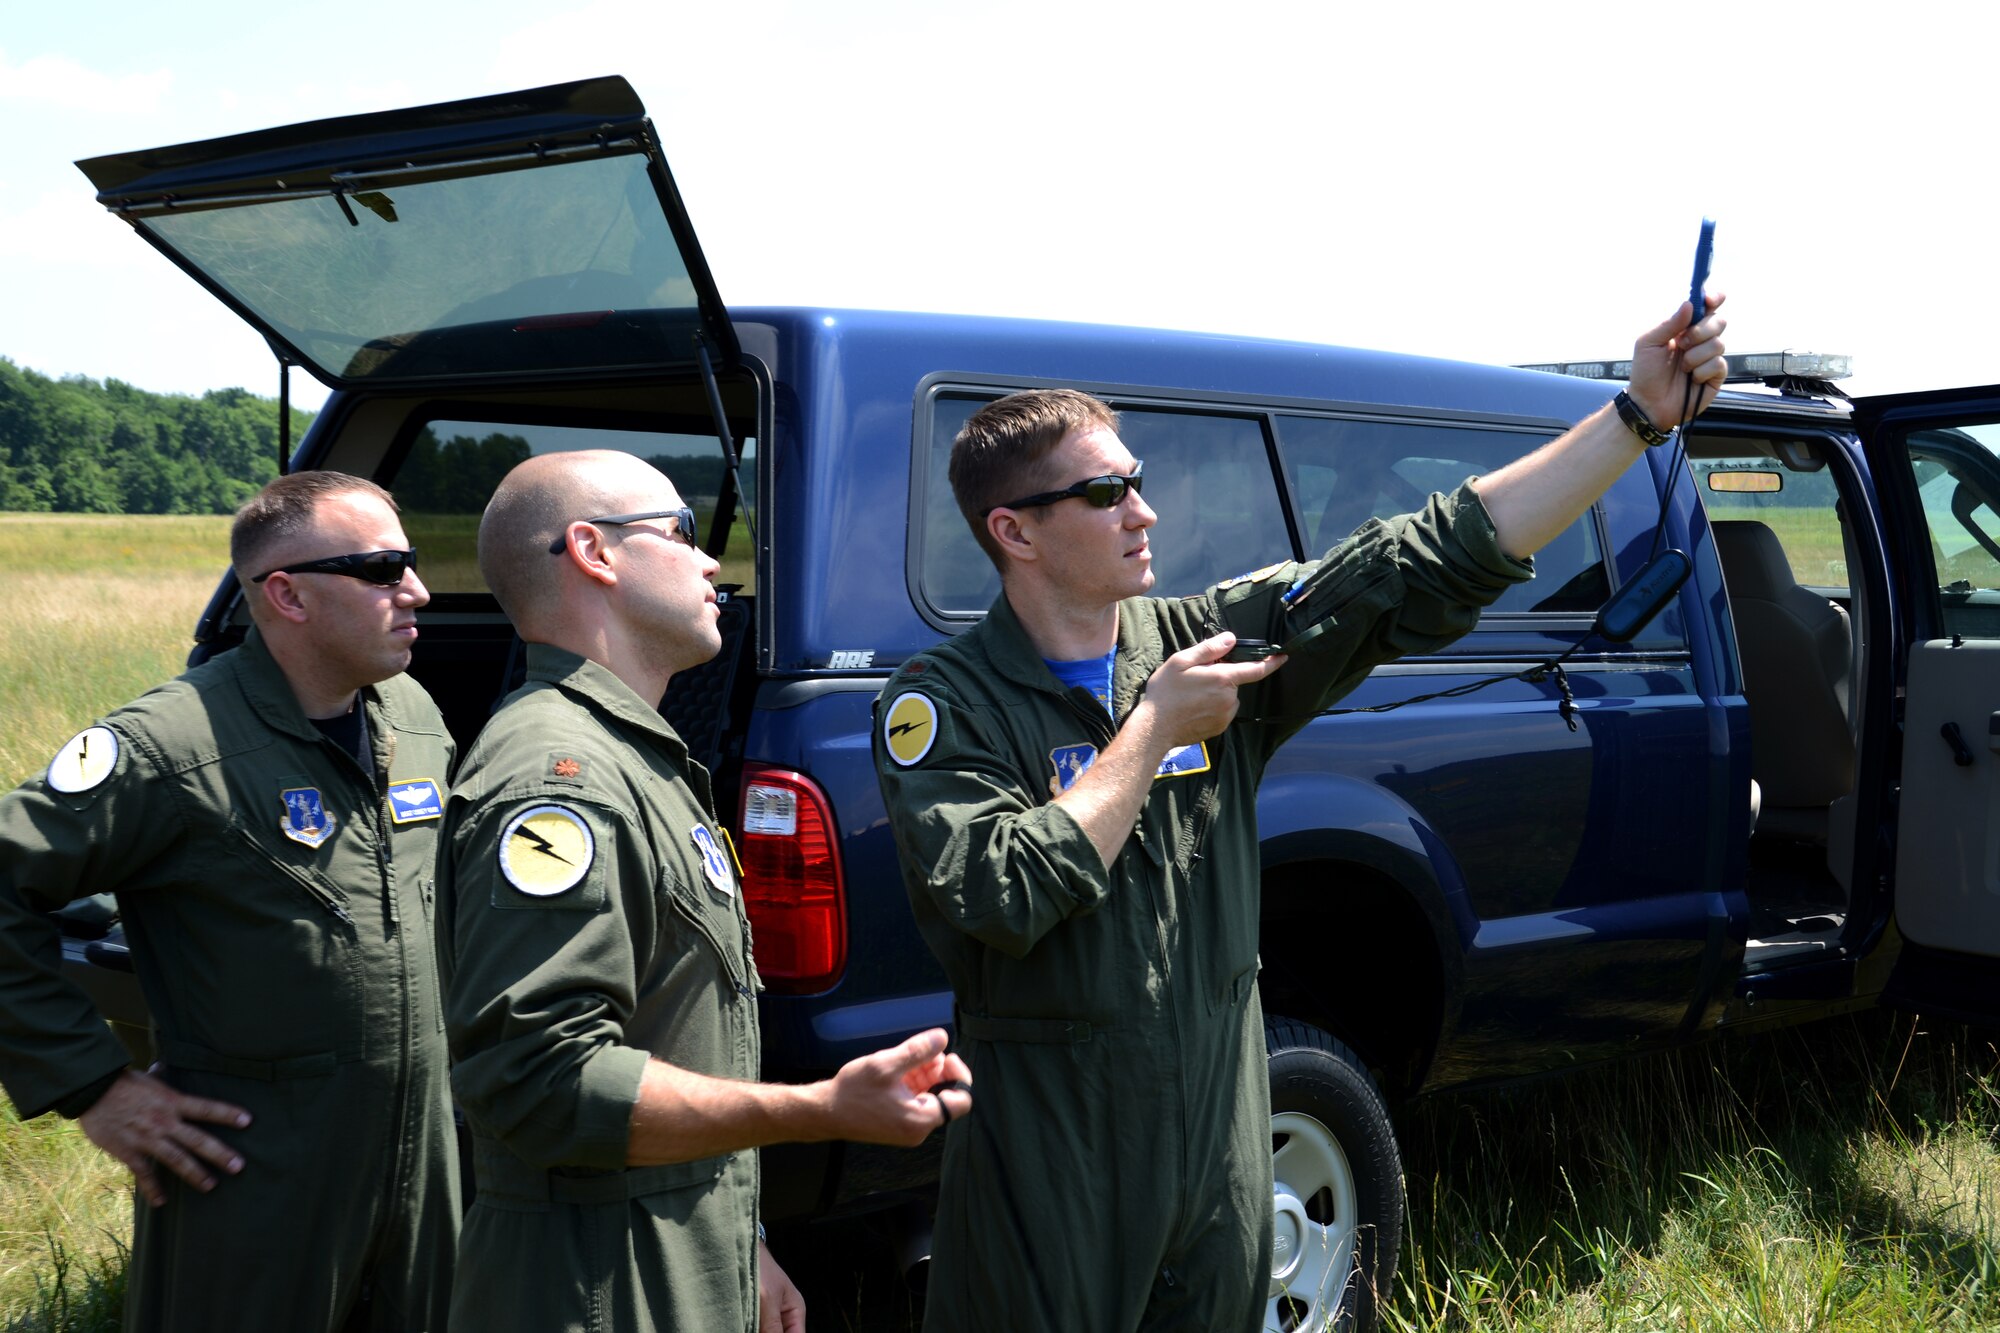 Maj. Chris Thiesing (right), tactics officer with the 118th Airlift Squadron, teaches Maj. Garrett Caponetti (center) how to check the winds at the drop zone using an anemometer during an aerial delivery exercise over Westover Air Reserve Base in Chicopee, Massachusetts, July 12, 2014. Behind them, the malfunction officer, Master Sgt. Corey Kass, a loadmaster with the 118th Airlift Squadron, looks on. These measurements are up-channeled to the crew on a C-130H Hercules aircraft in the skies above so they can make better calculations and drop the cargo on target. (Air National Guard photo by Tech. Sgt. Joshua Mead/Released)